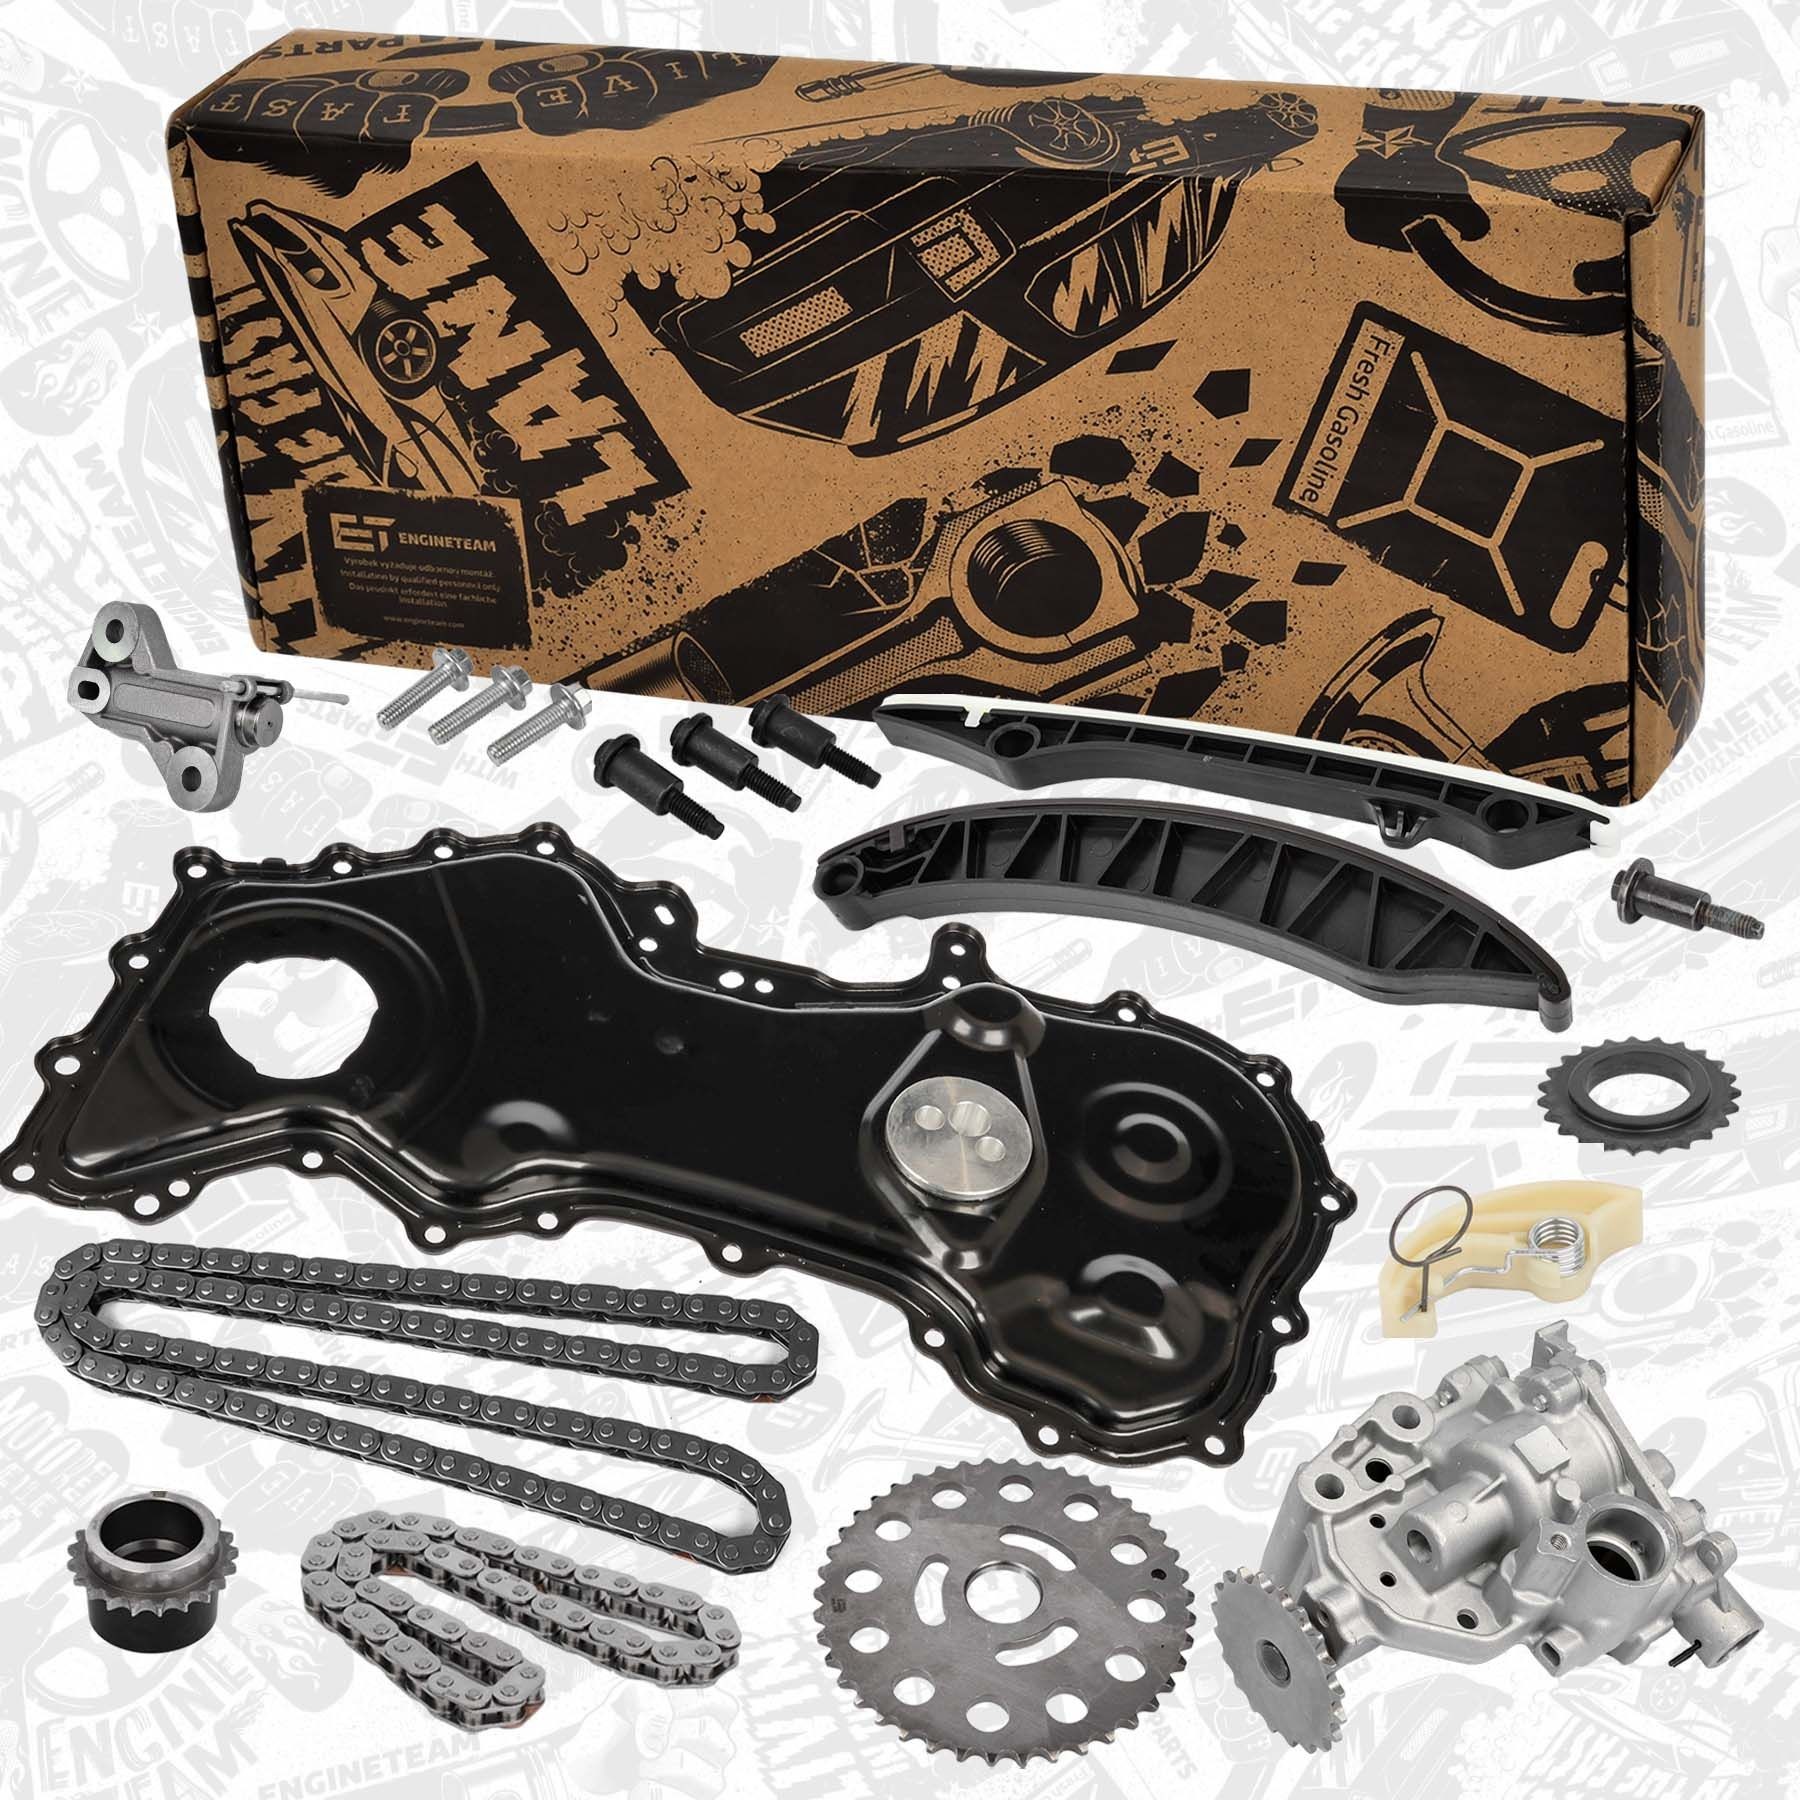 ET ENGINETEAM RS0073VR3 Timing chain kit 1302800Q1A